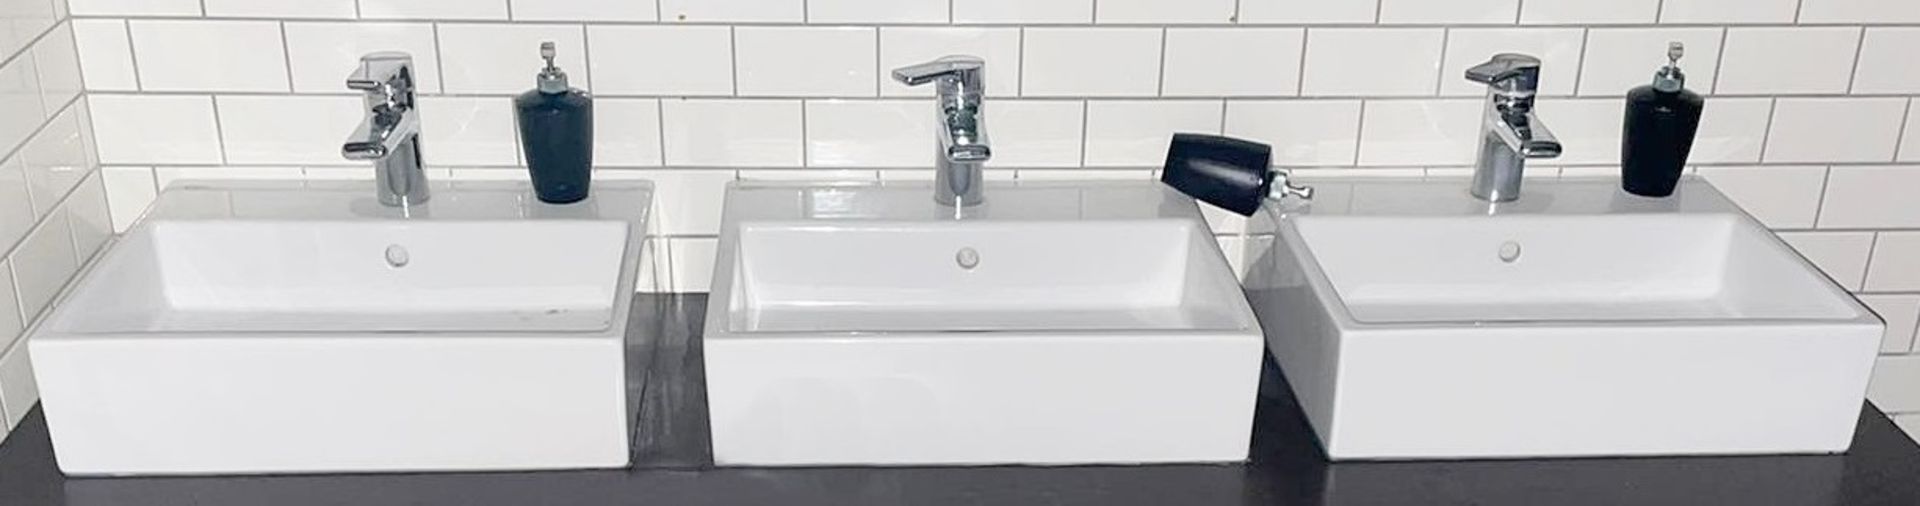 1 x Bathroom Sink Unit With Three Ceramic Countertop Sink Basins and Mixer Taps - Dimensions H120 - Image 2 of 2